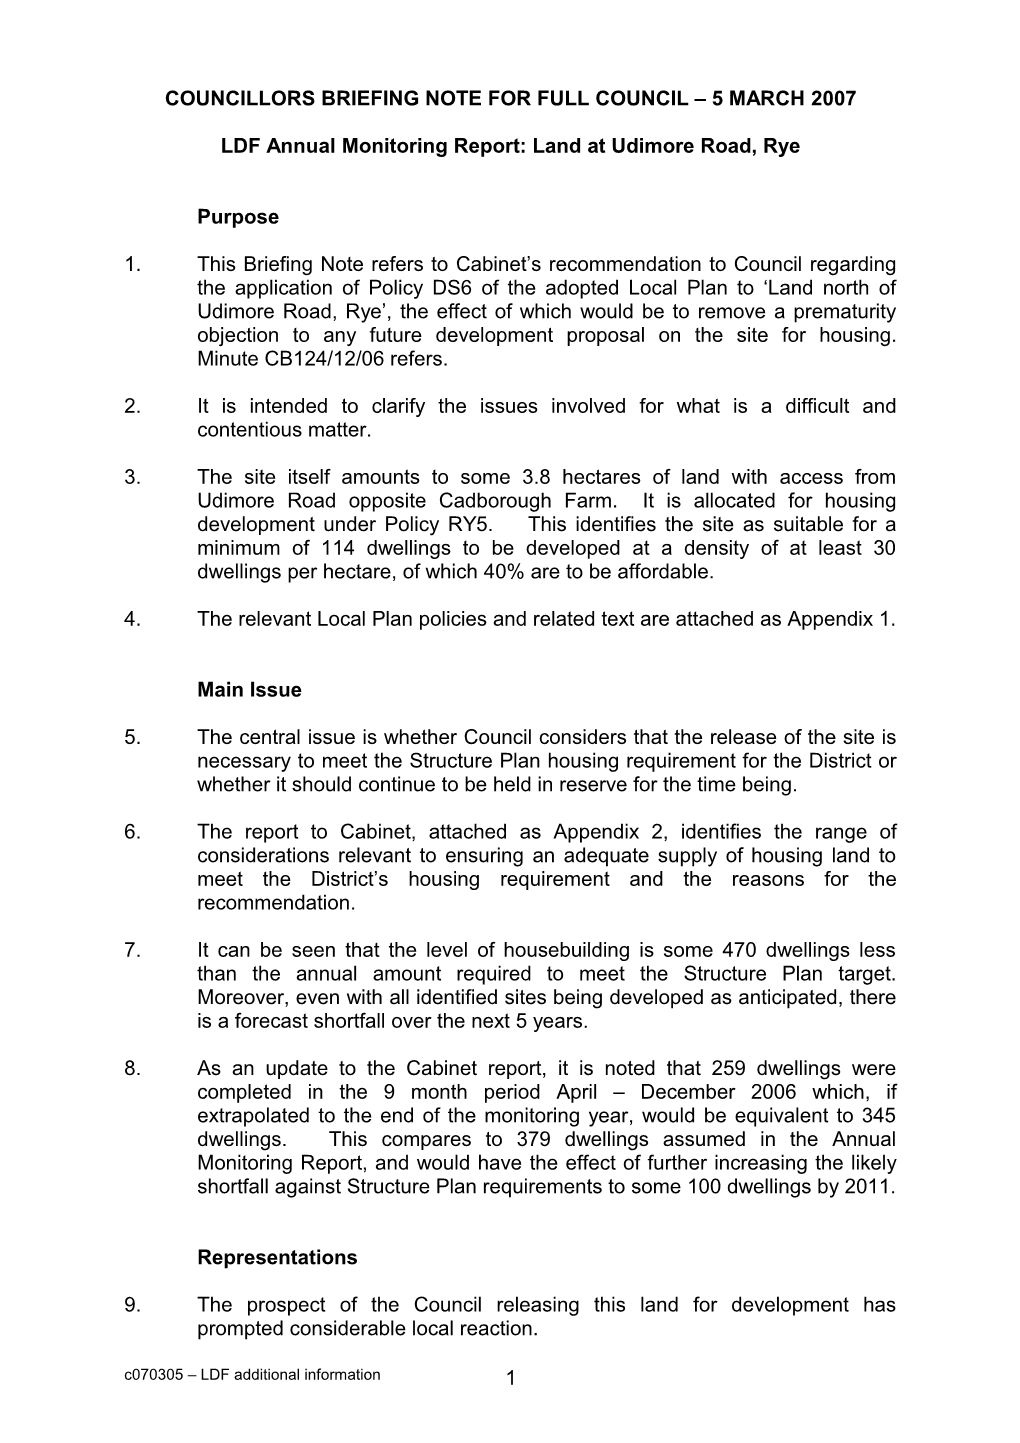 Councillors Briefing Note